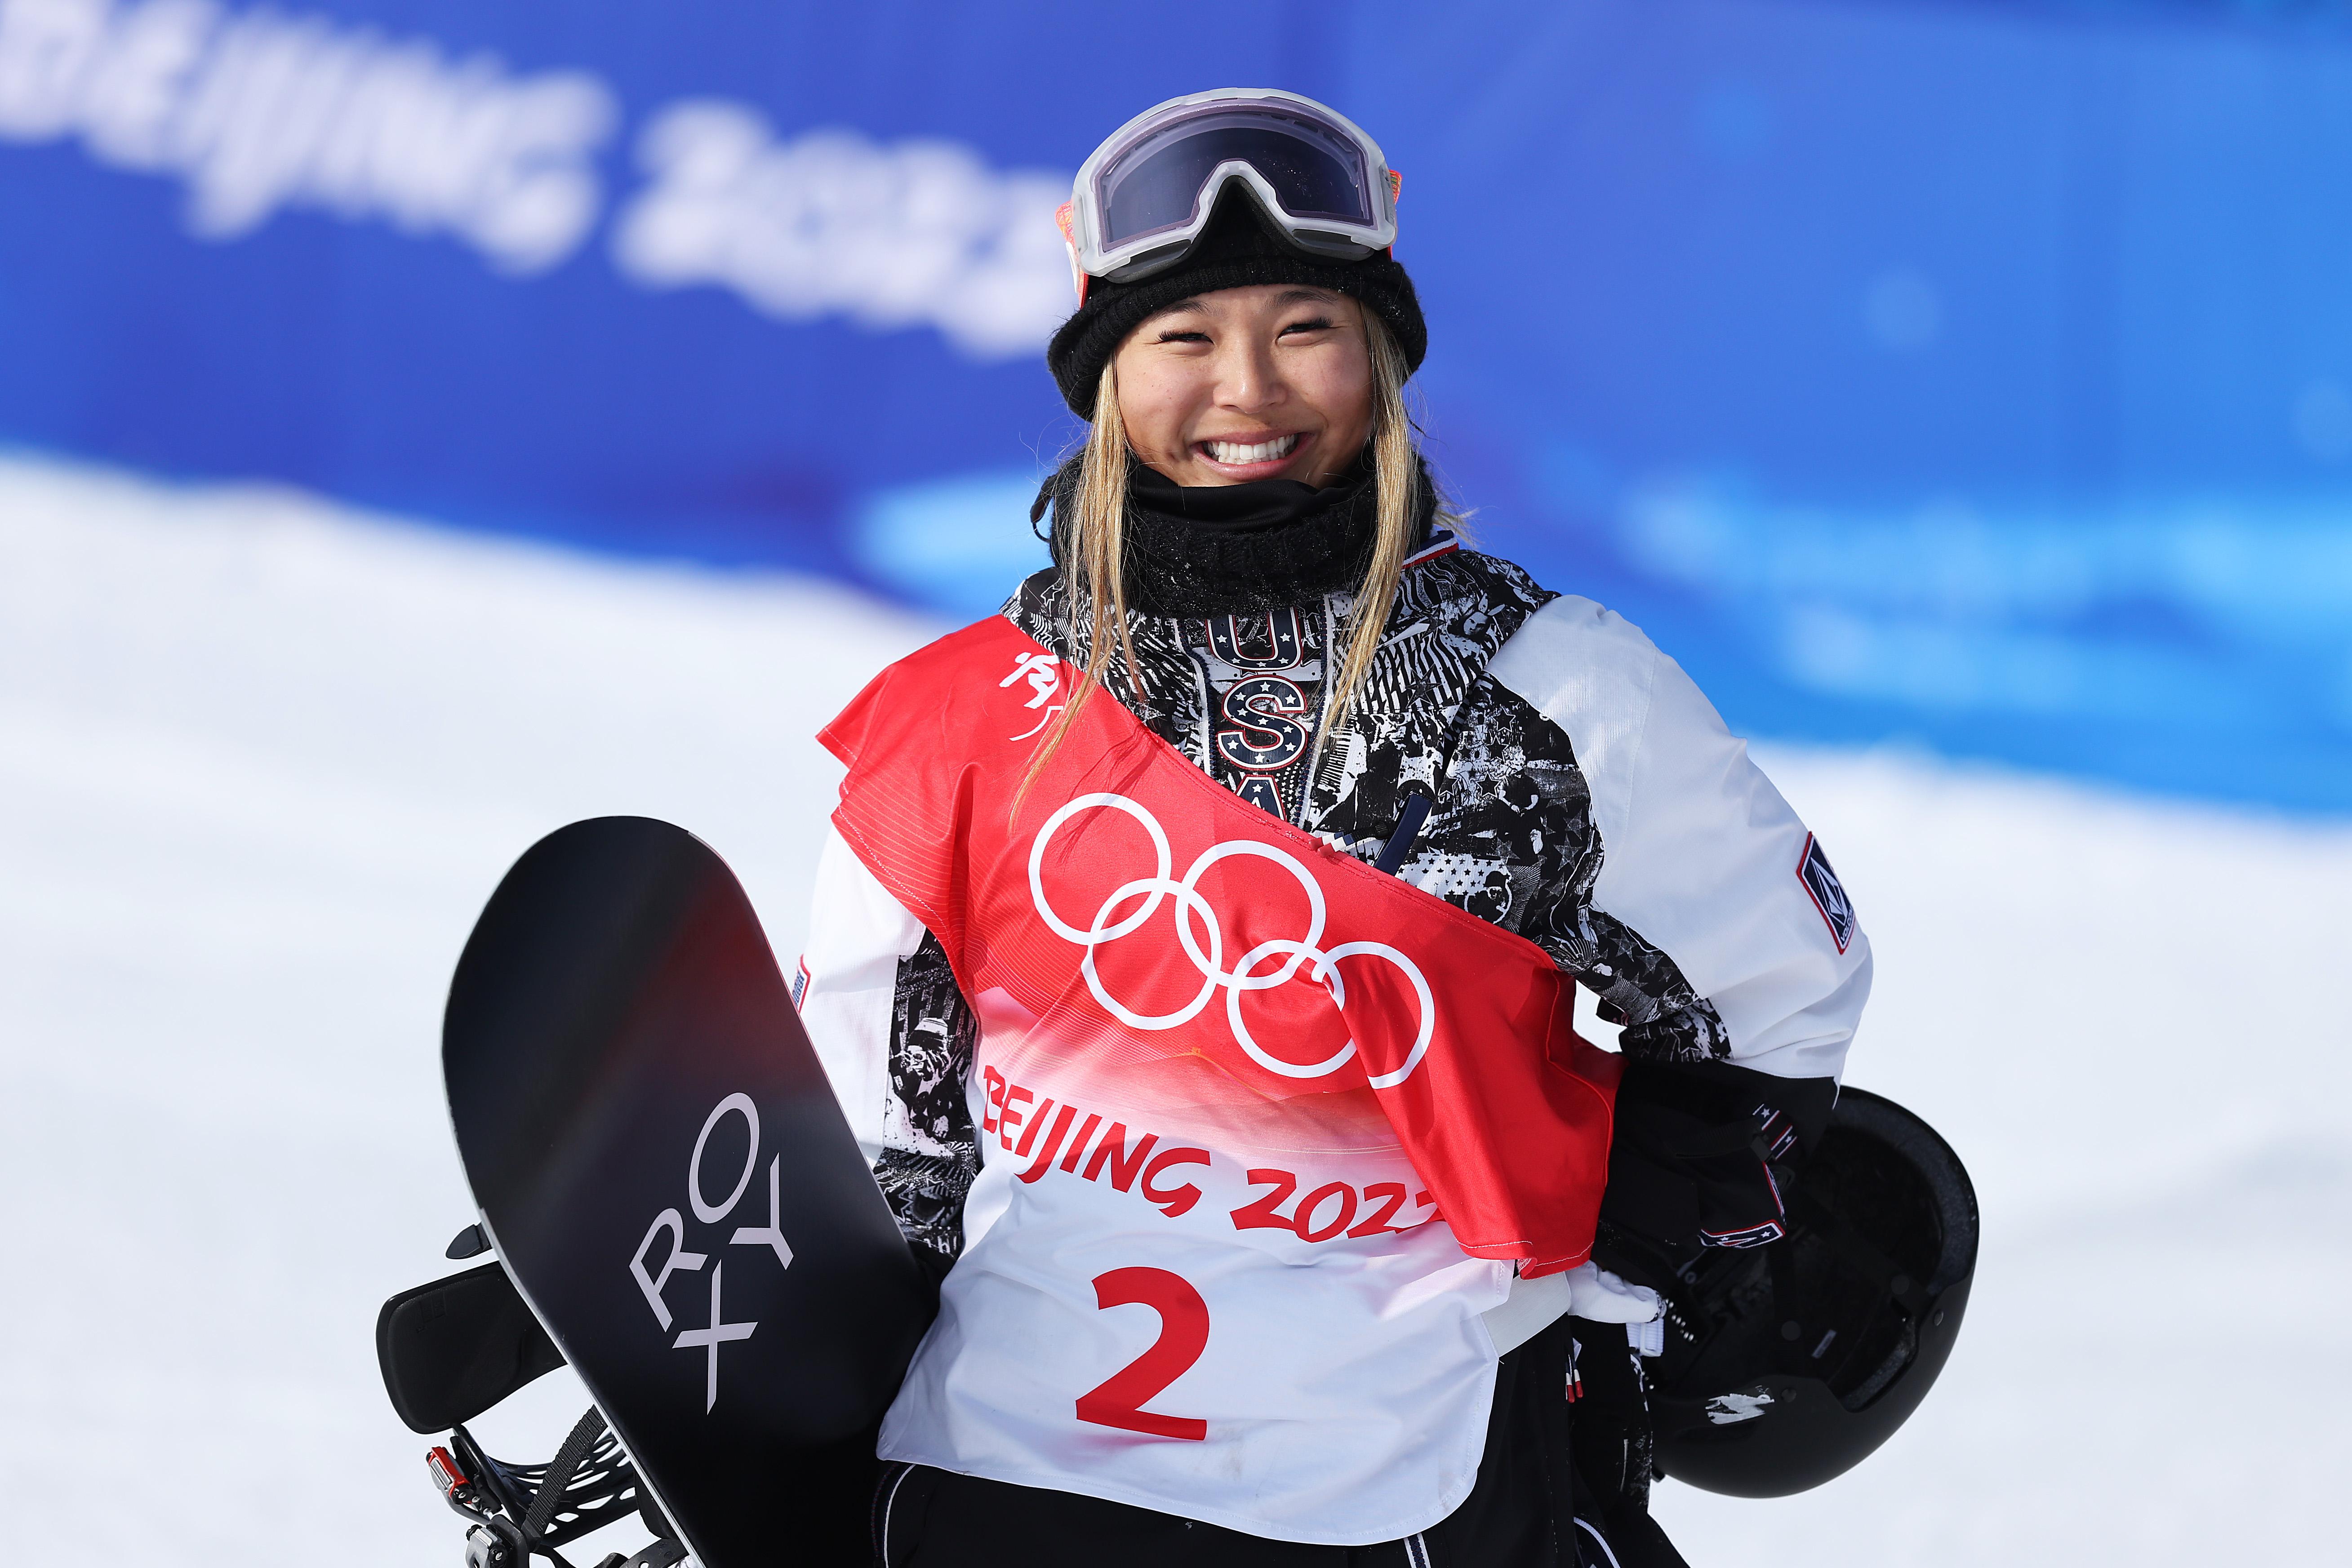 Slut strands at the Winter Olympics Hairstyle is on Chloe Kim, Eileen Gu, basically every womens slopestyler and freeskier.